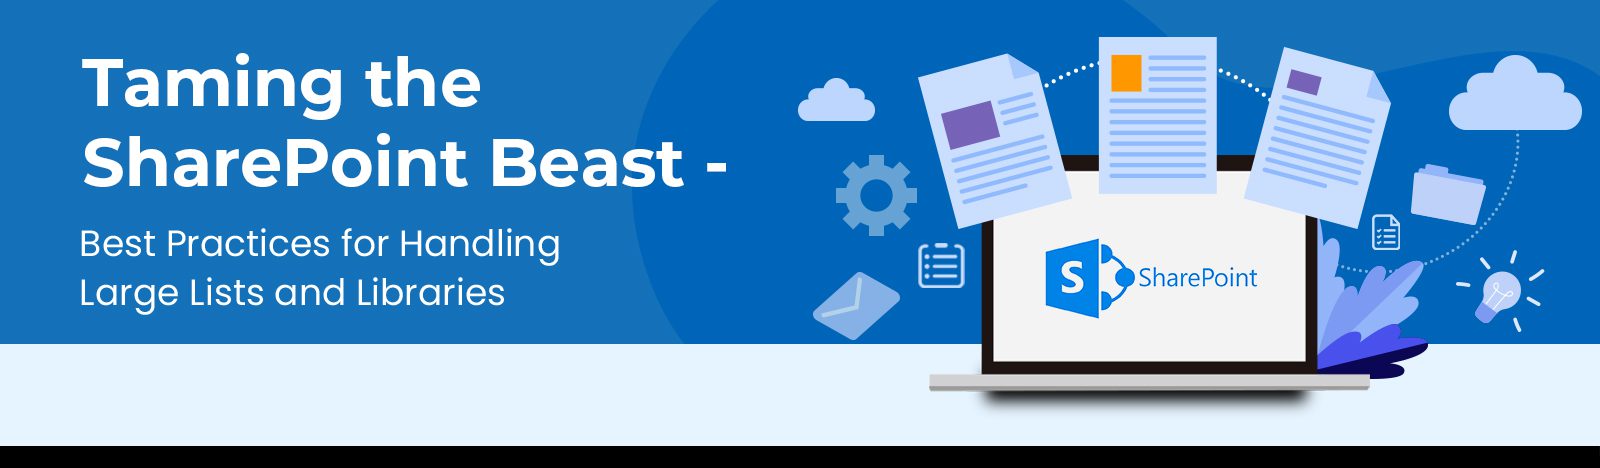 Taming the SharePoint Beast: Best Practices to Handle Large Lists and Libraries